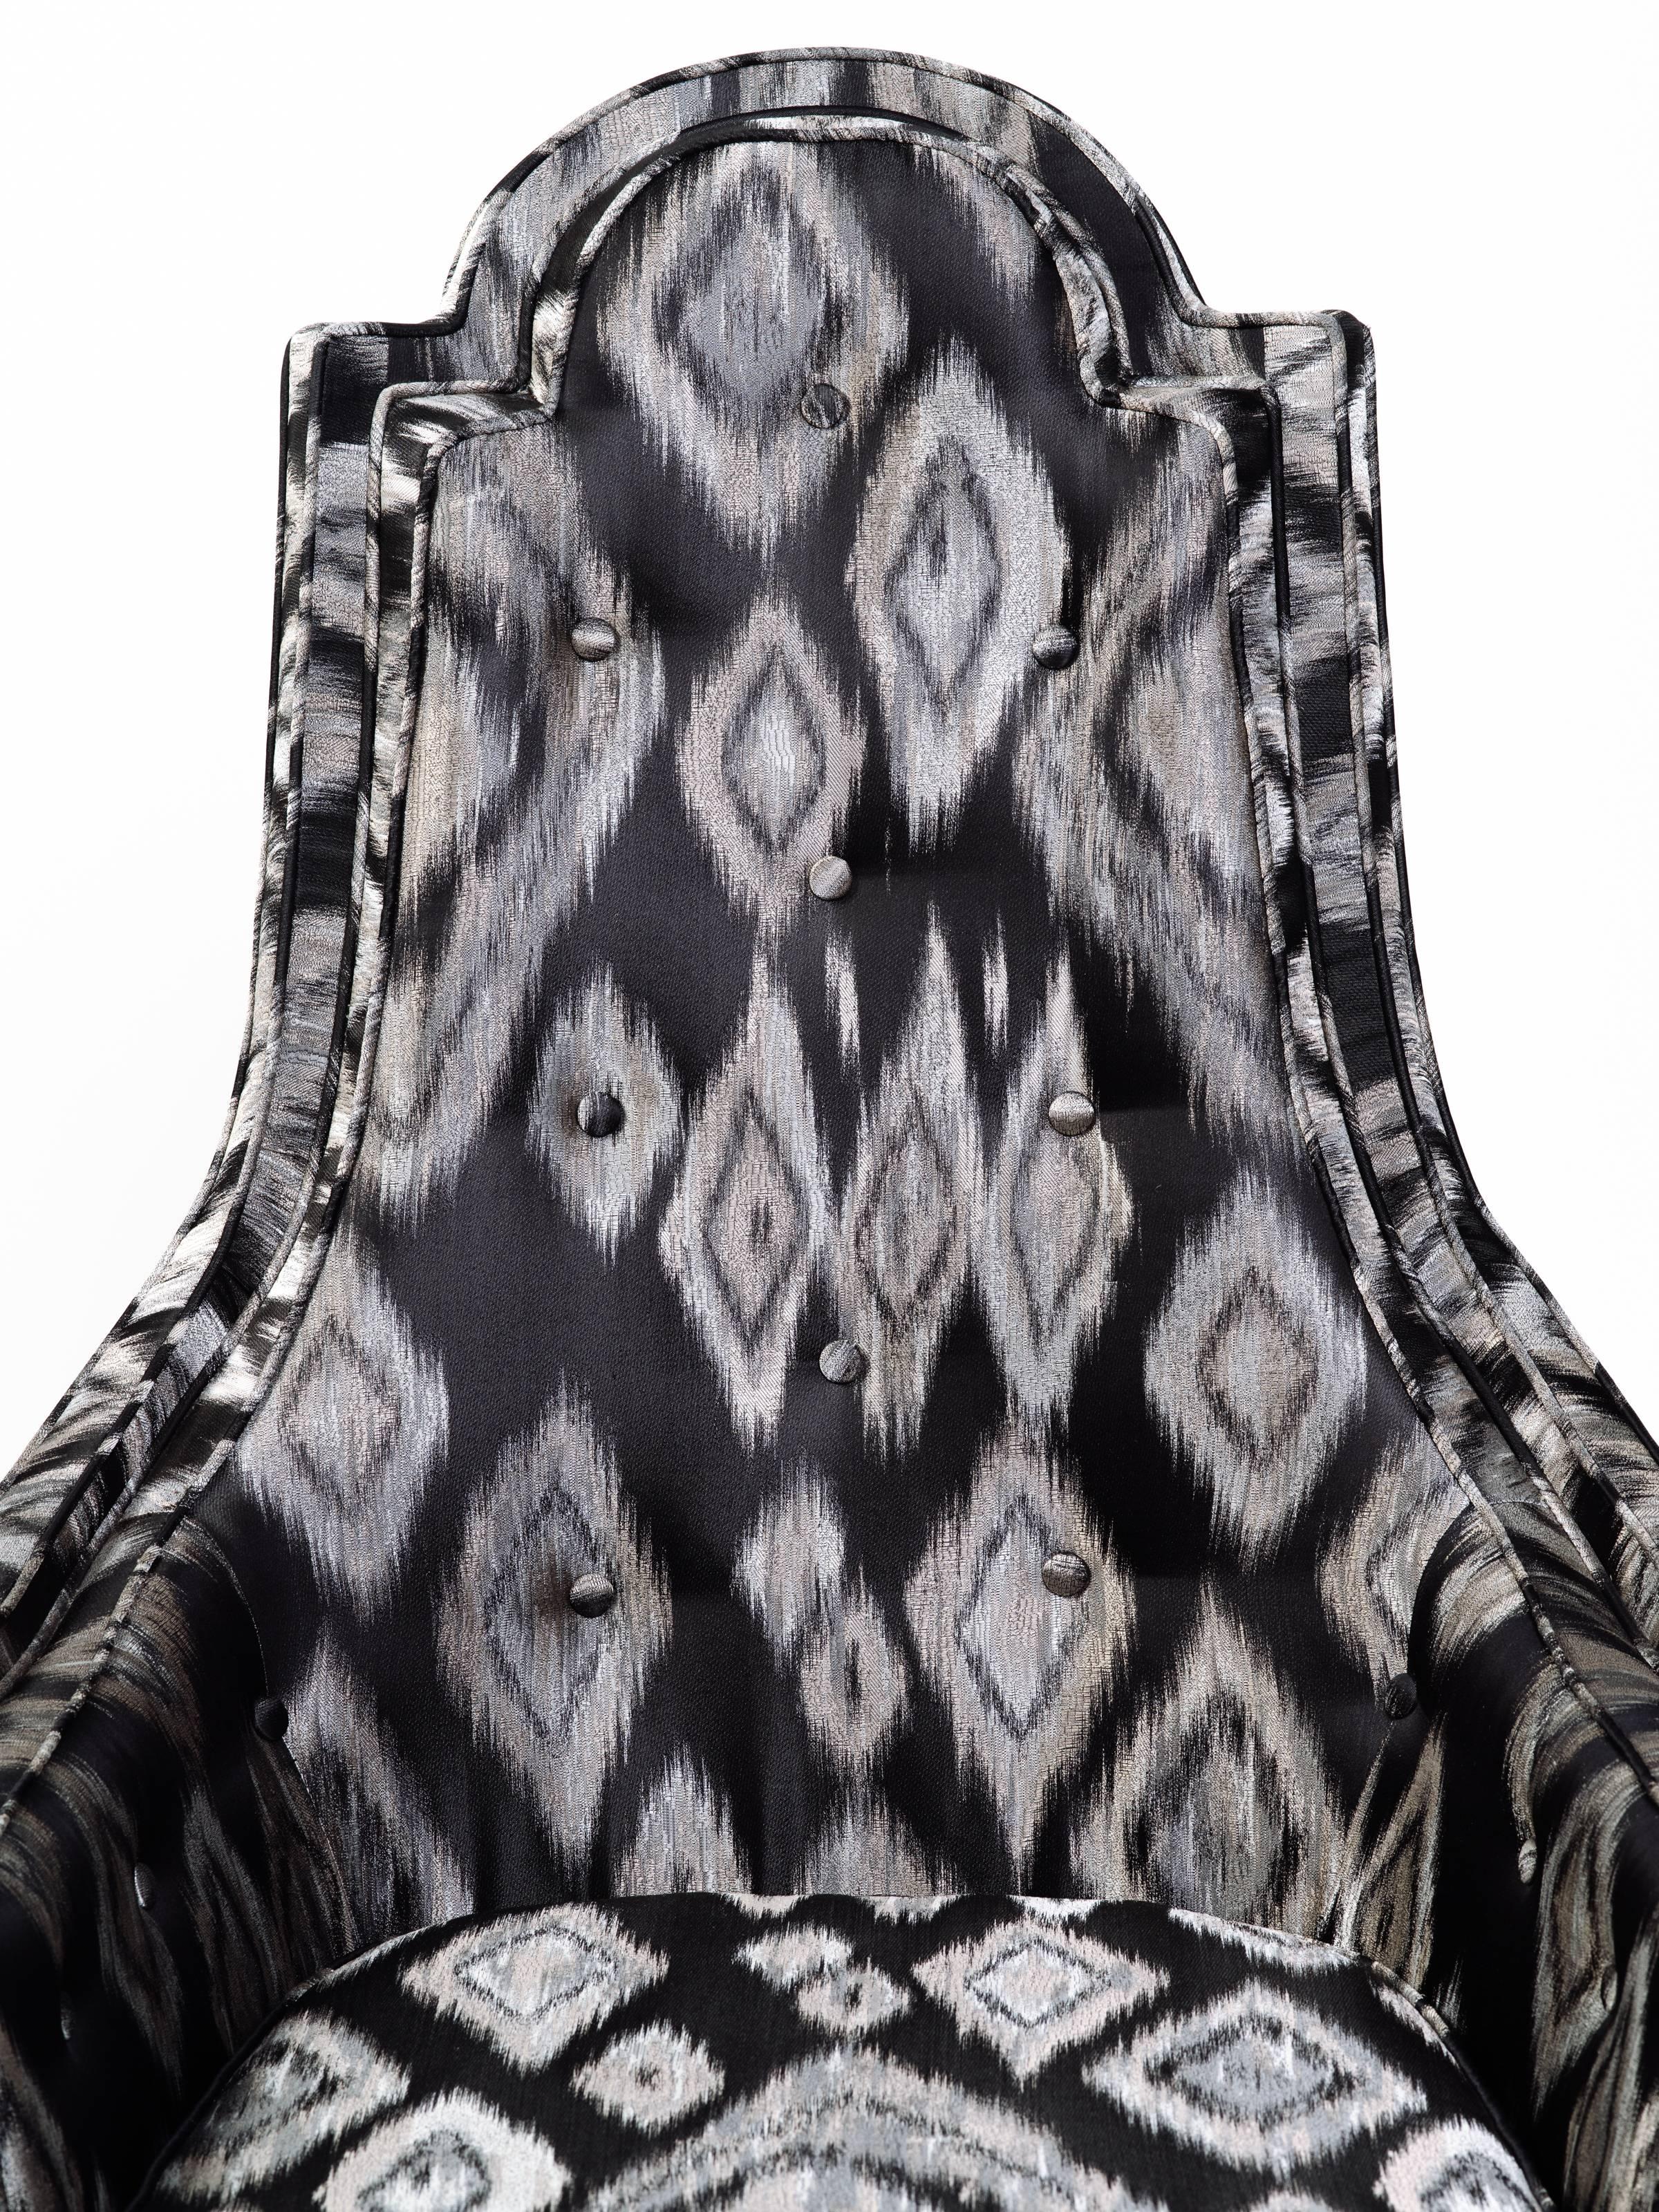 Mid-Century Modern Skirted High Back Chair in Black and Silver Ikat. c. 1960's For Sale 1